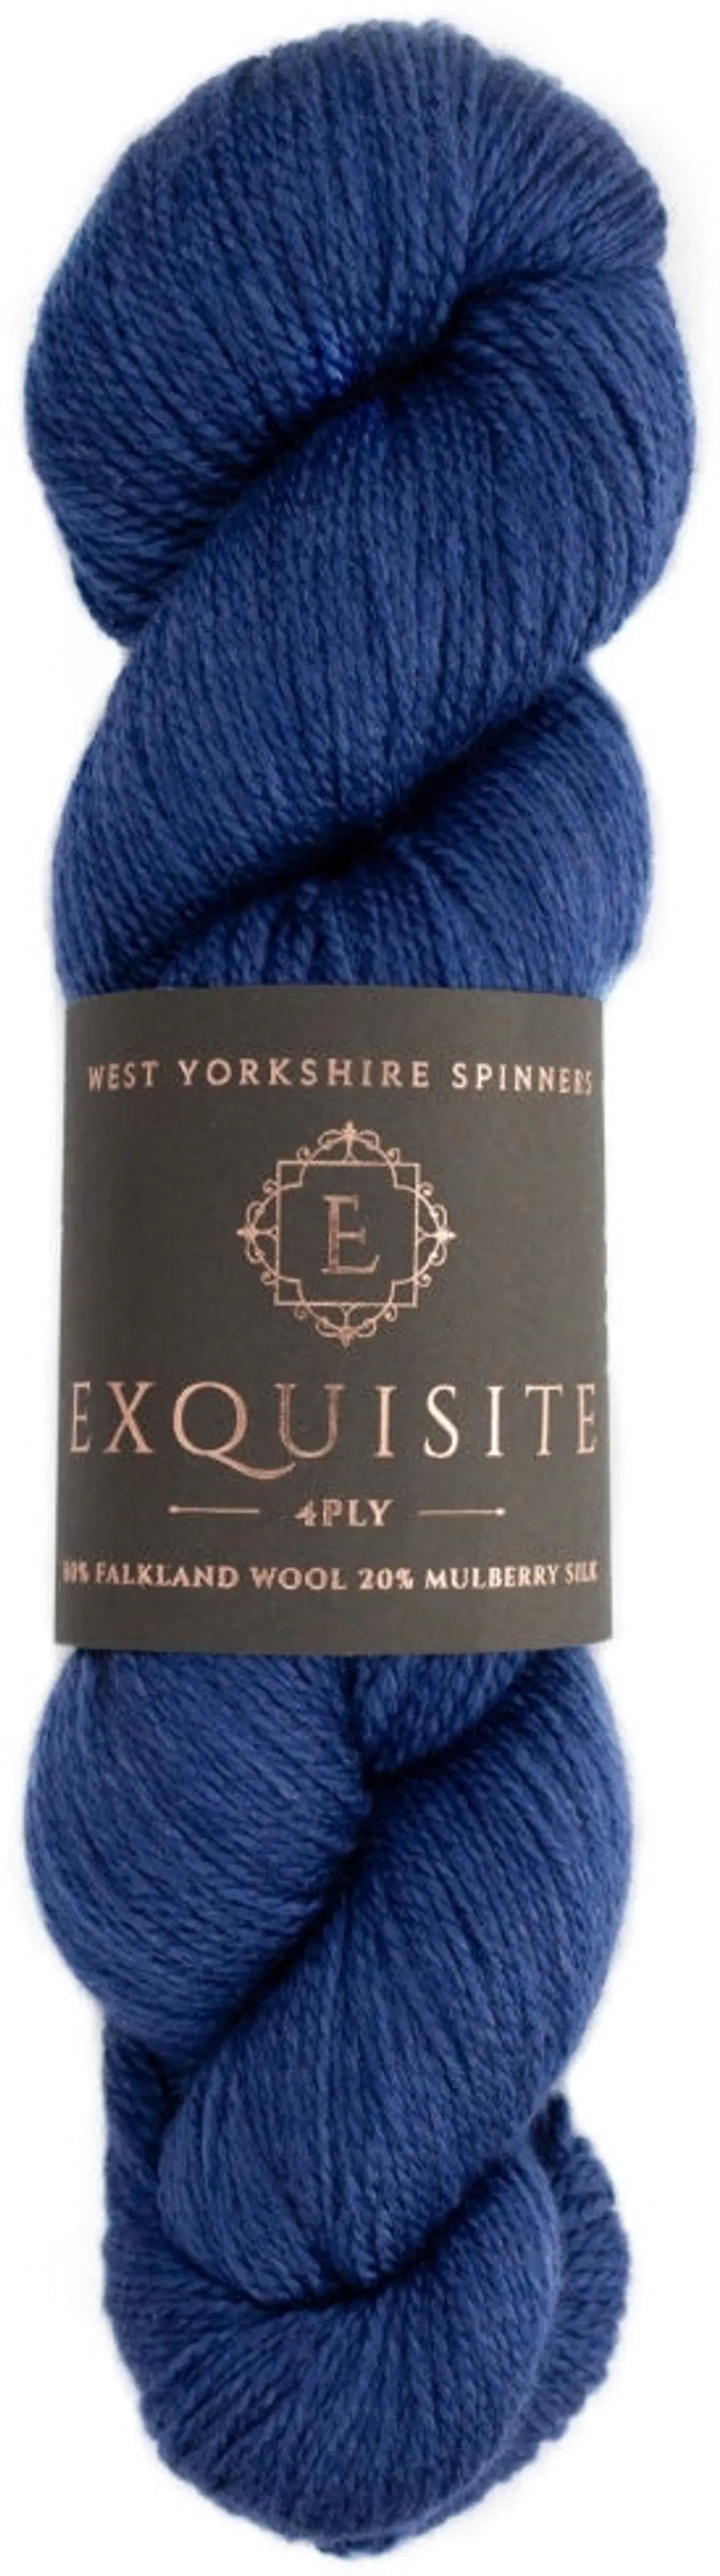 West Yorkshire Spinners lanka Exquisite 4PLY 100g Regal 438